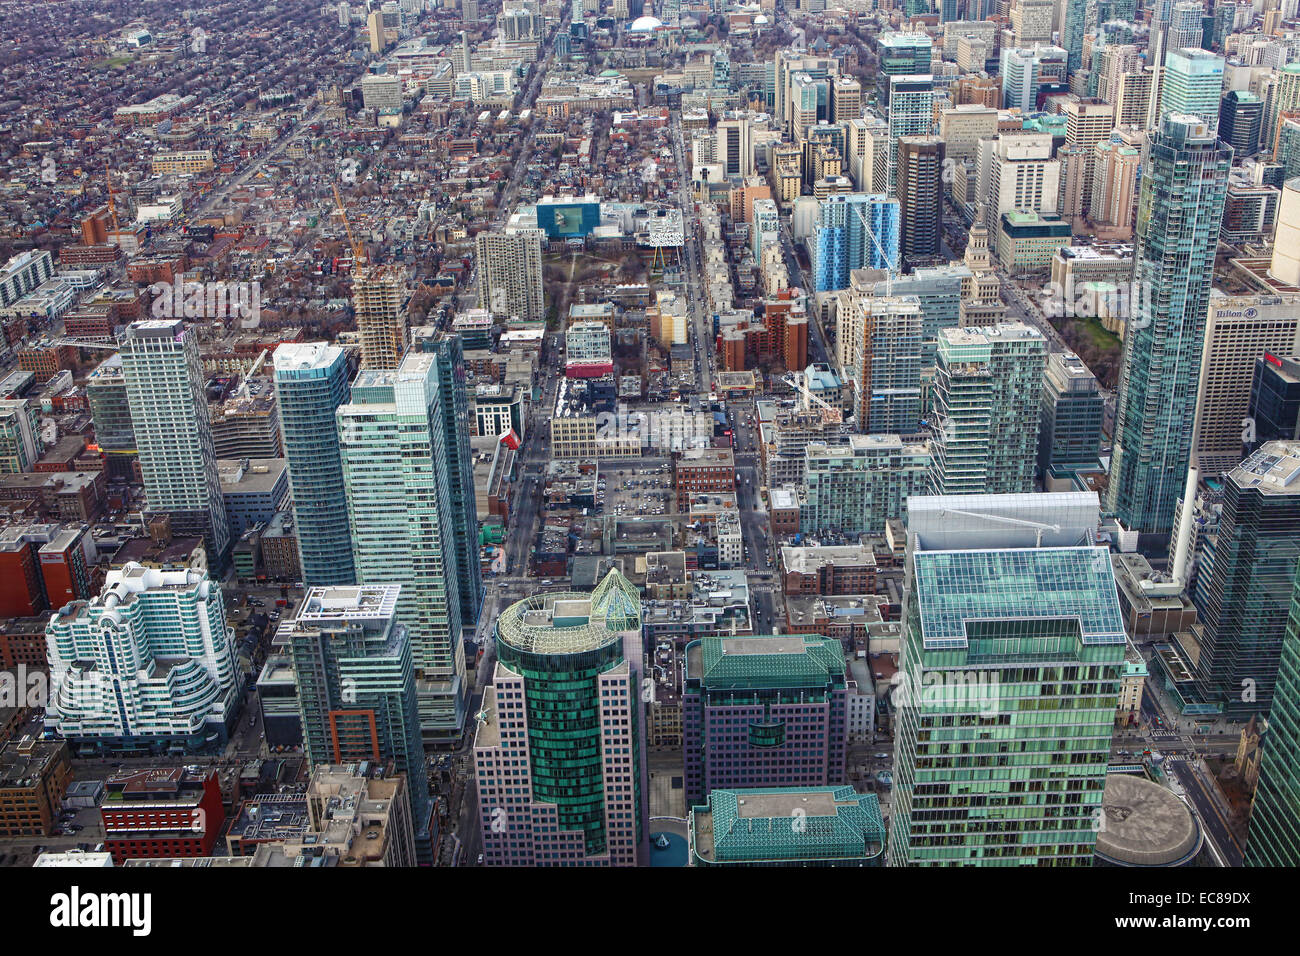 Aerial view of Toronto, Canada buildings Stock Photo